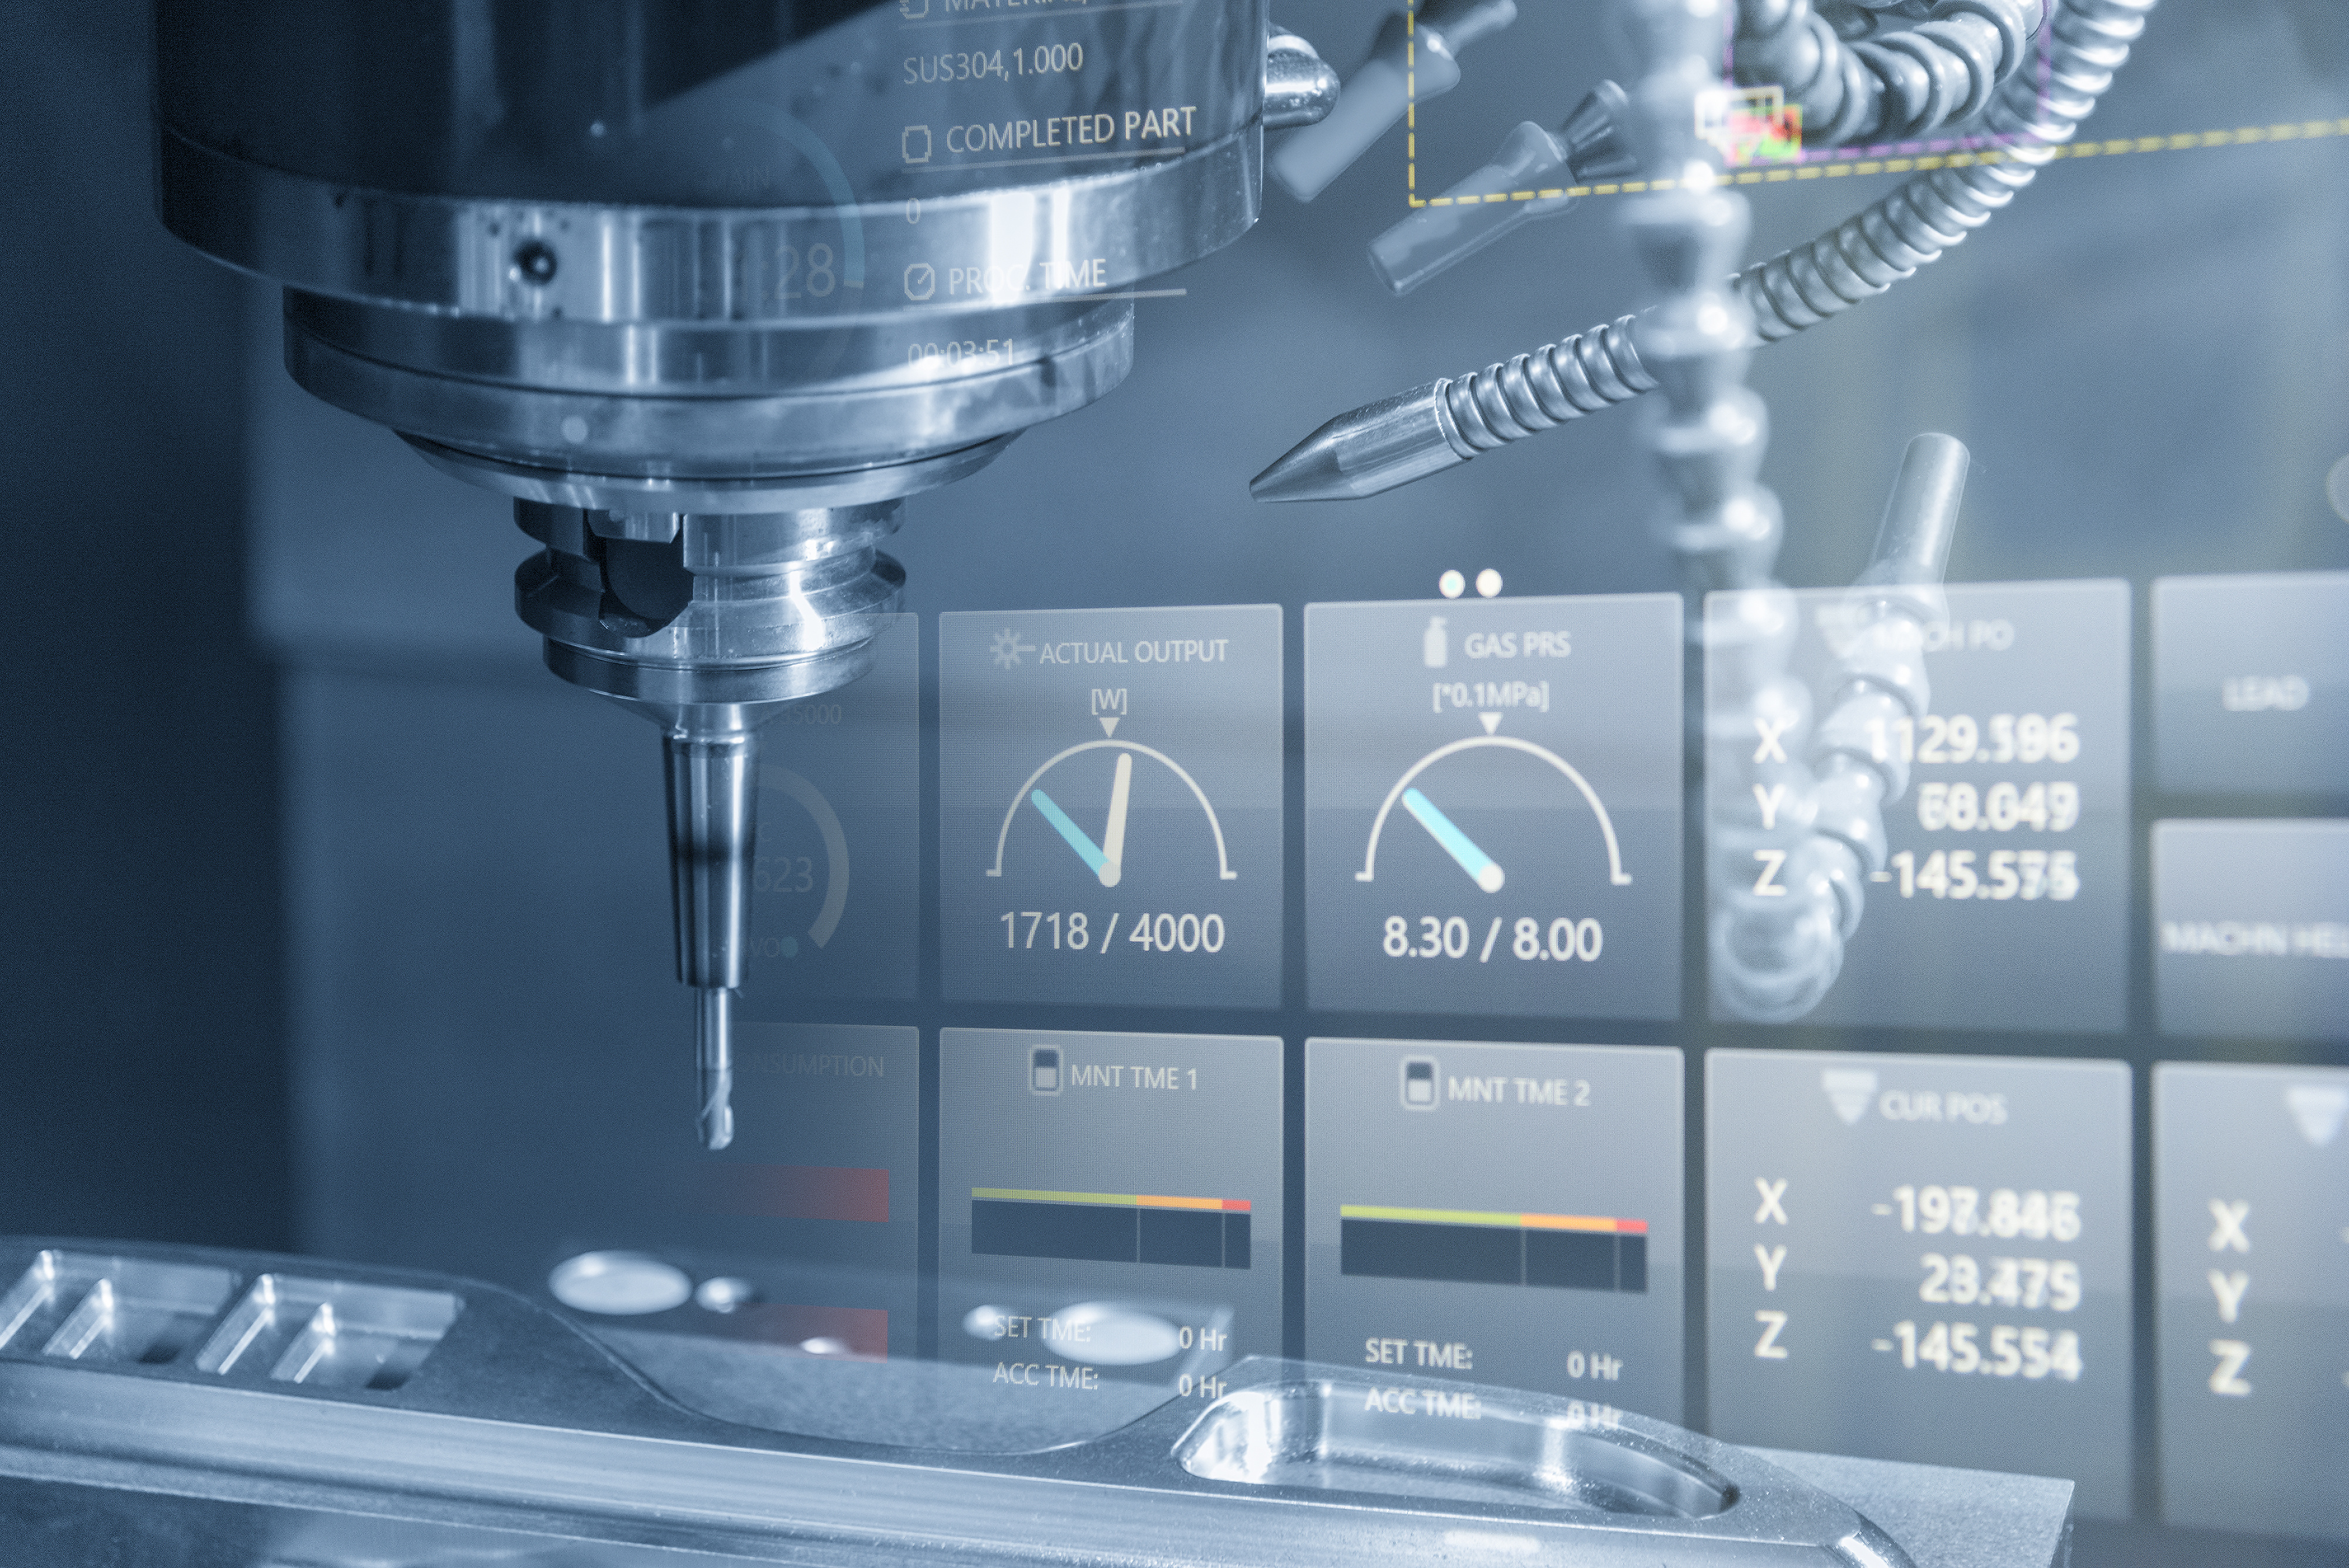 Why Should You Connect Your Manufacturing Floor to the IIoT? Here are 10 Compelling Reasons.